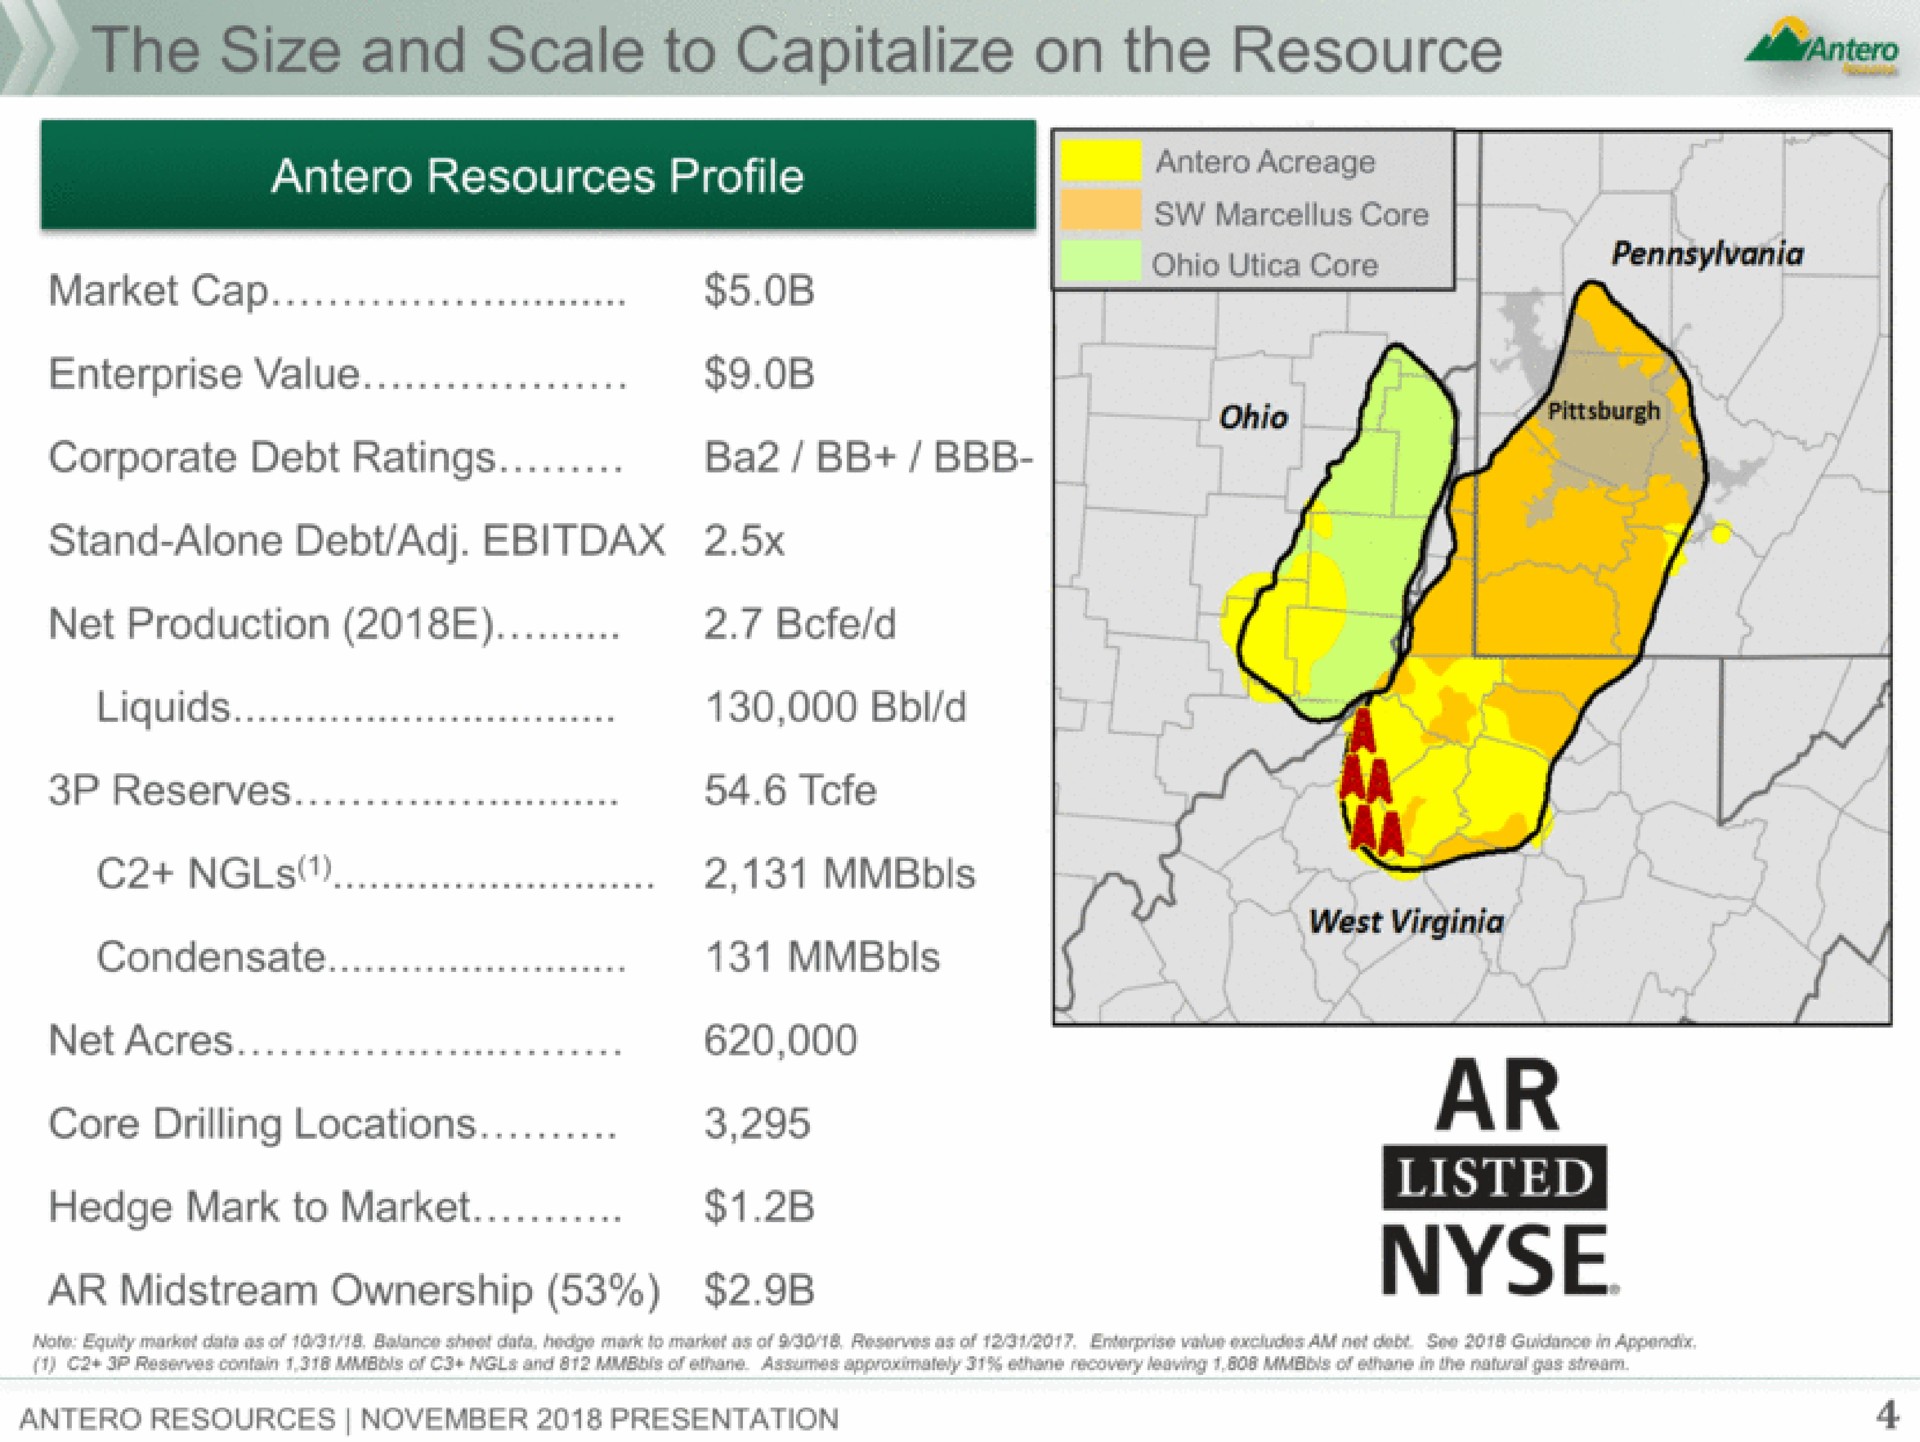 the size and scale to capitalize on the resource market cap | Antero Midstream Partners